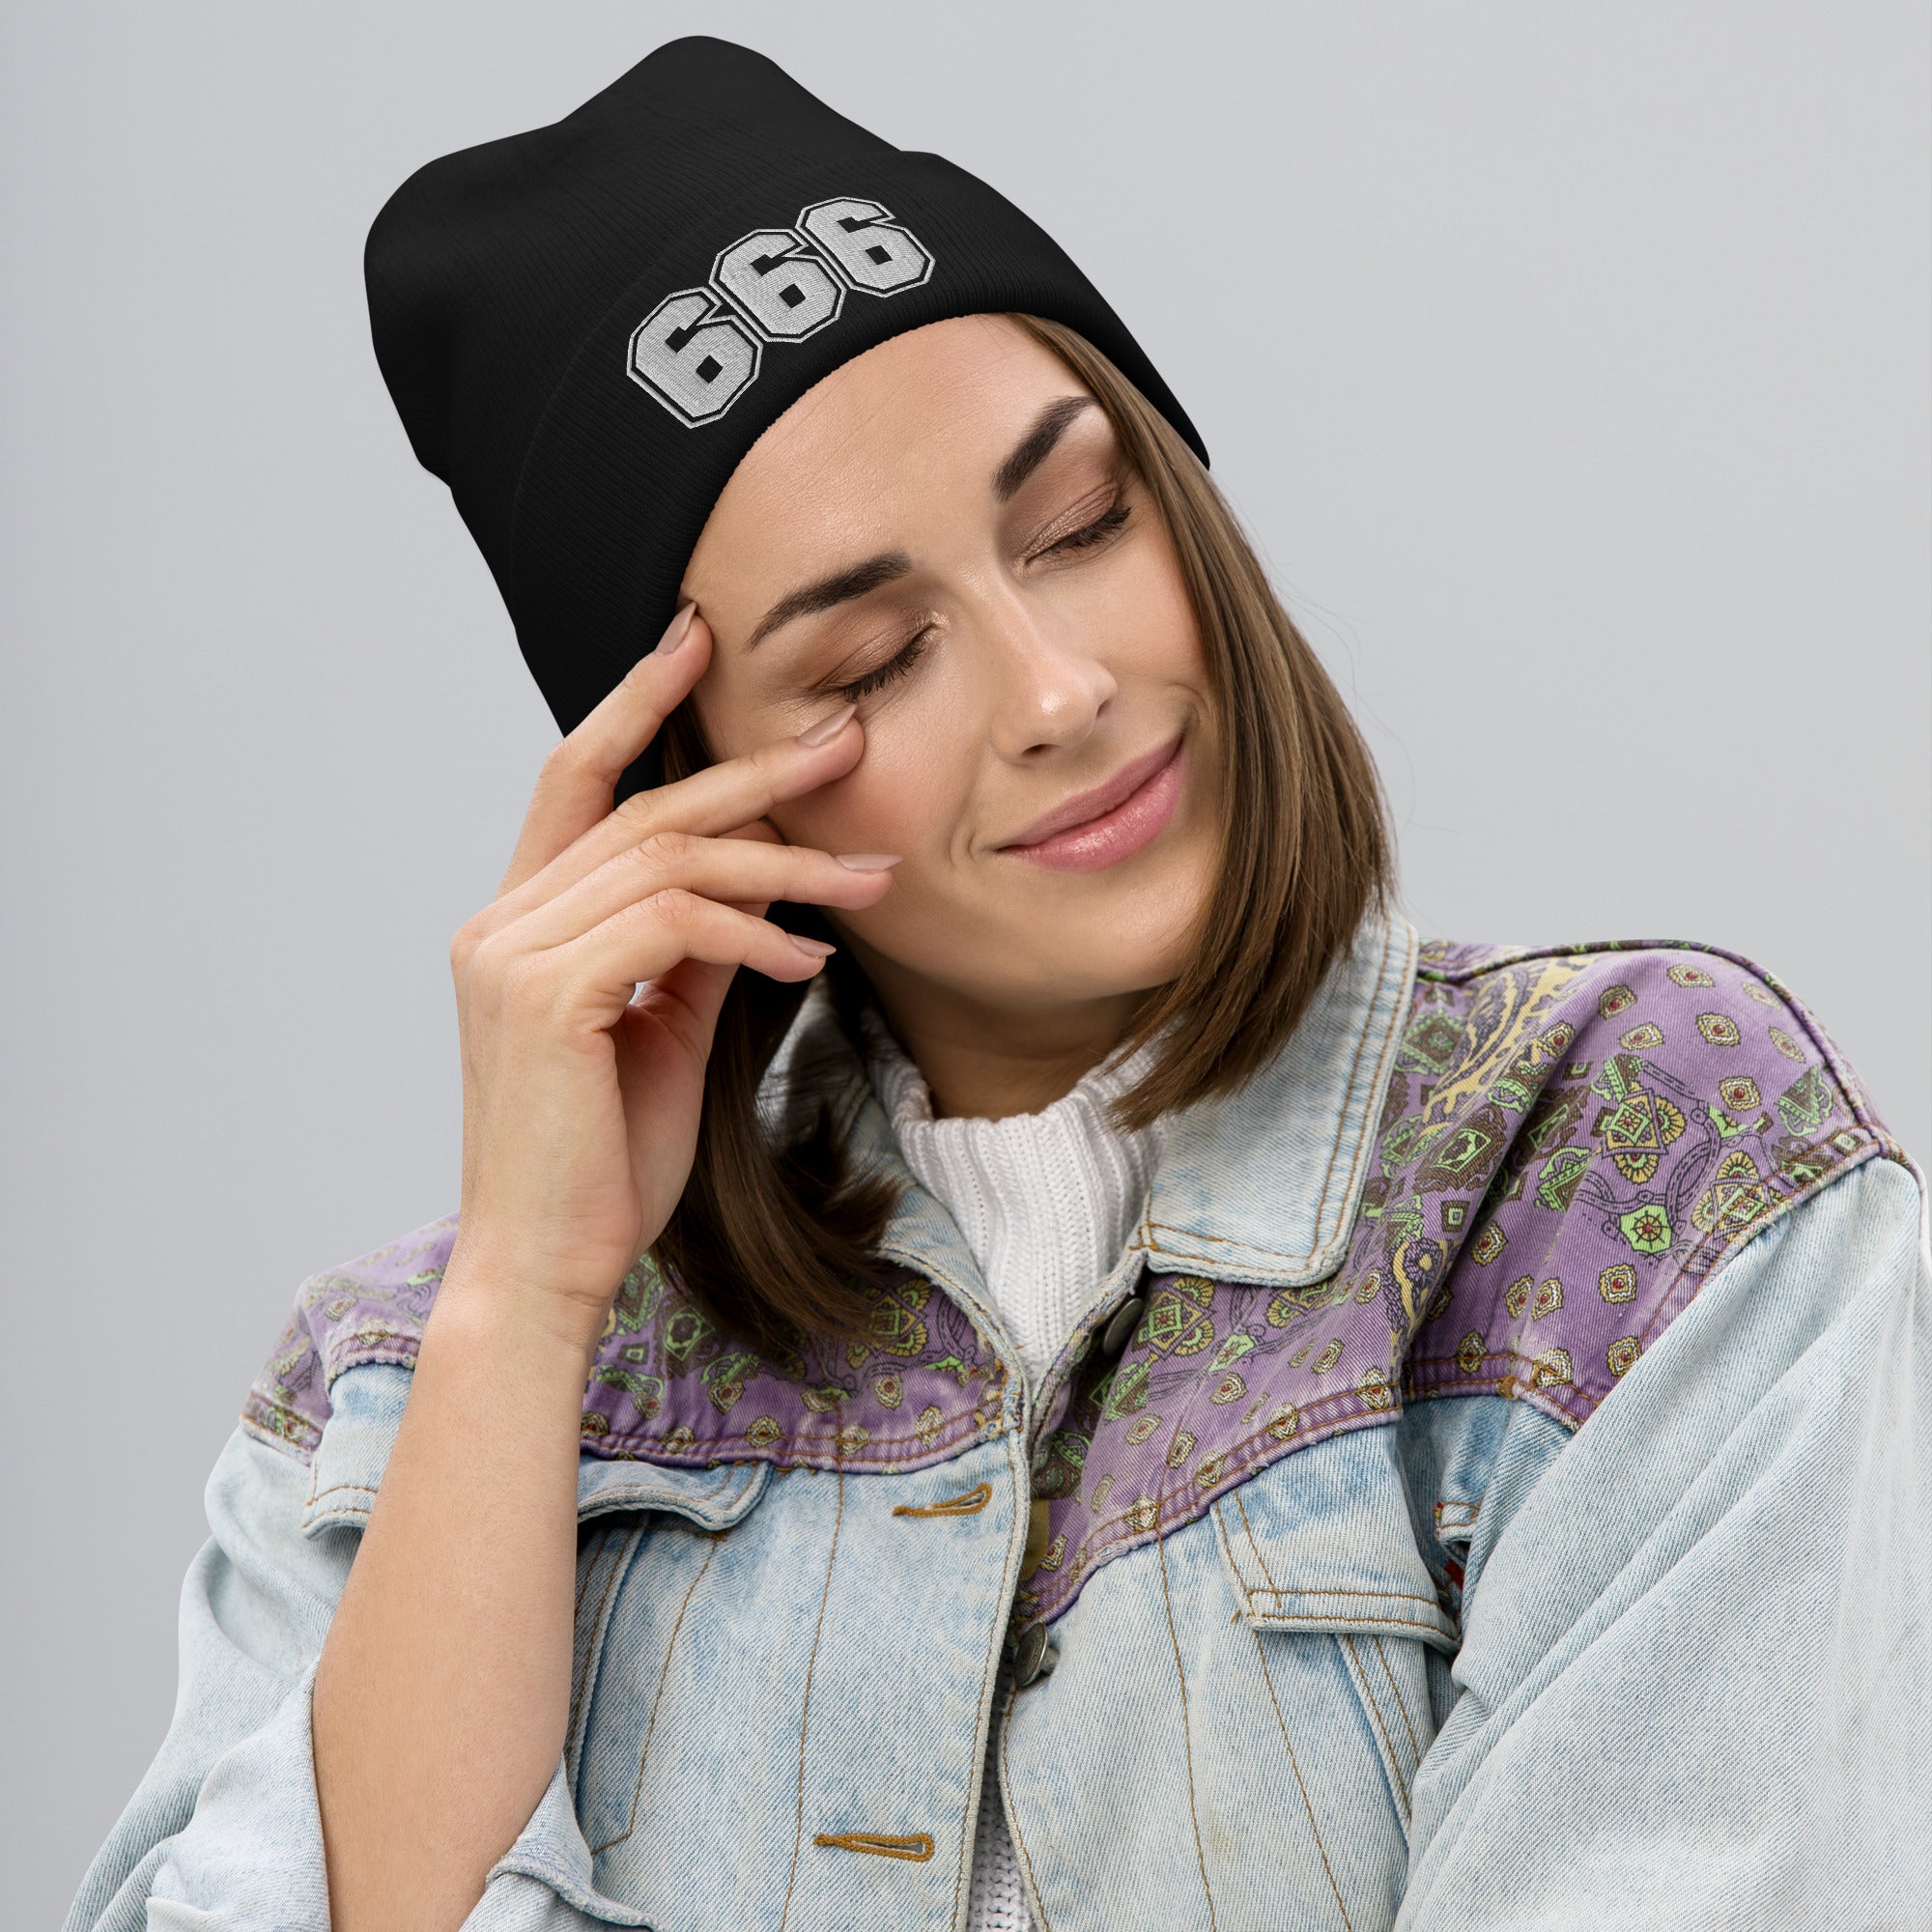 666 The Number of the Beast Evil Embroidered Cuff Beanie White Thread - Edge of Life Designs